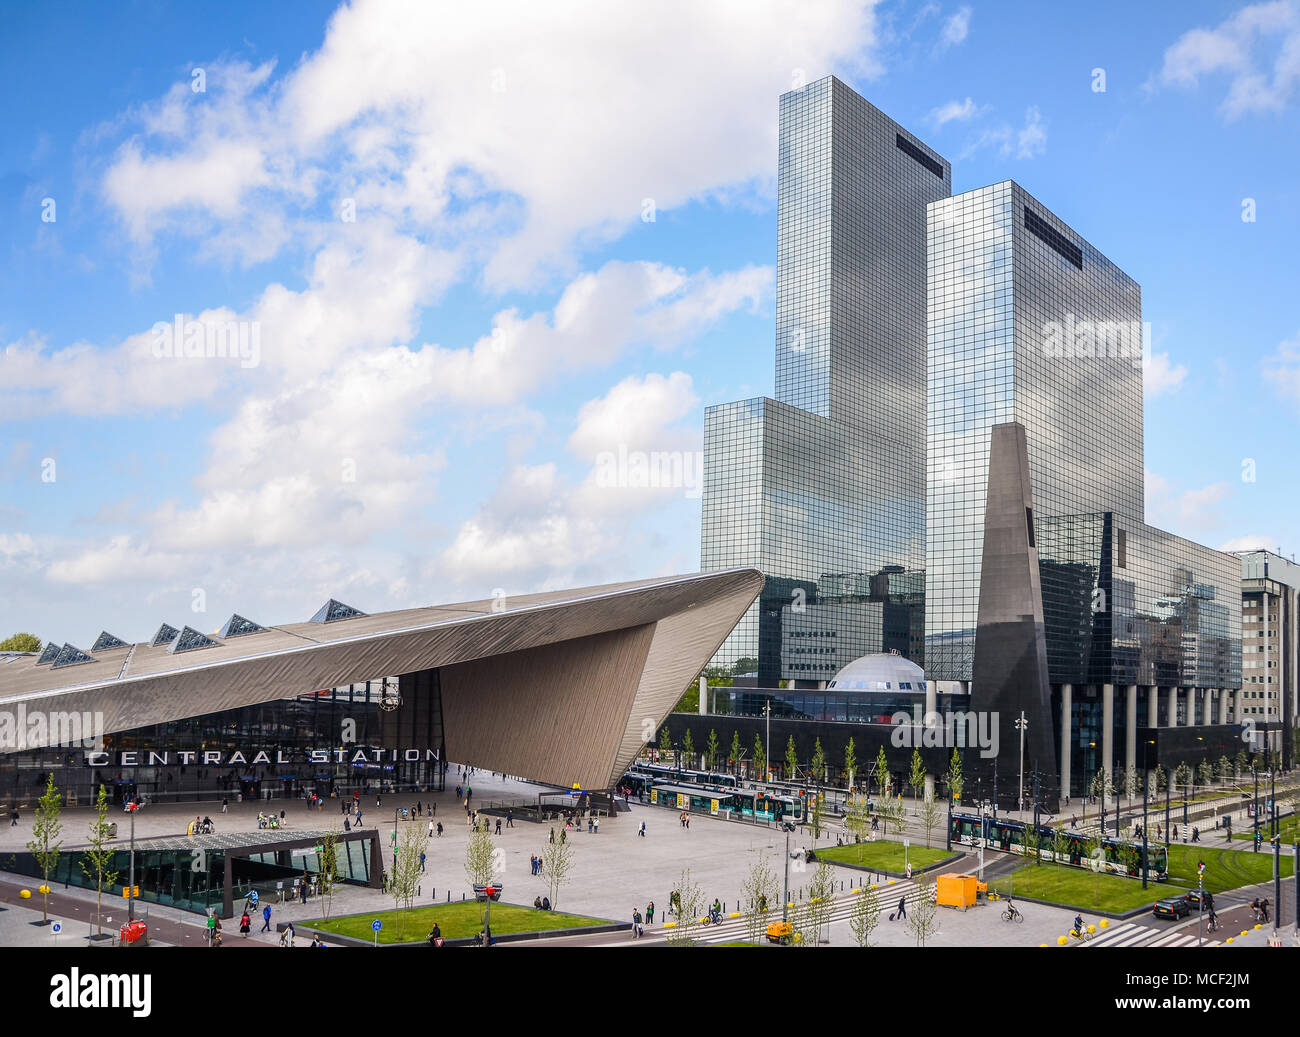 Rotterdam, Netherlands financial centre skyline, including the Central Station, which is an important transport hub with 110,000 passengers per day Stock Photo